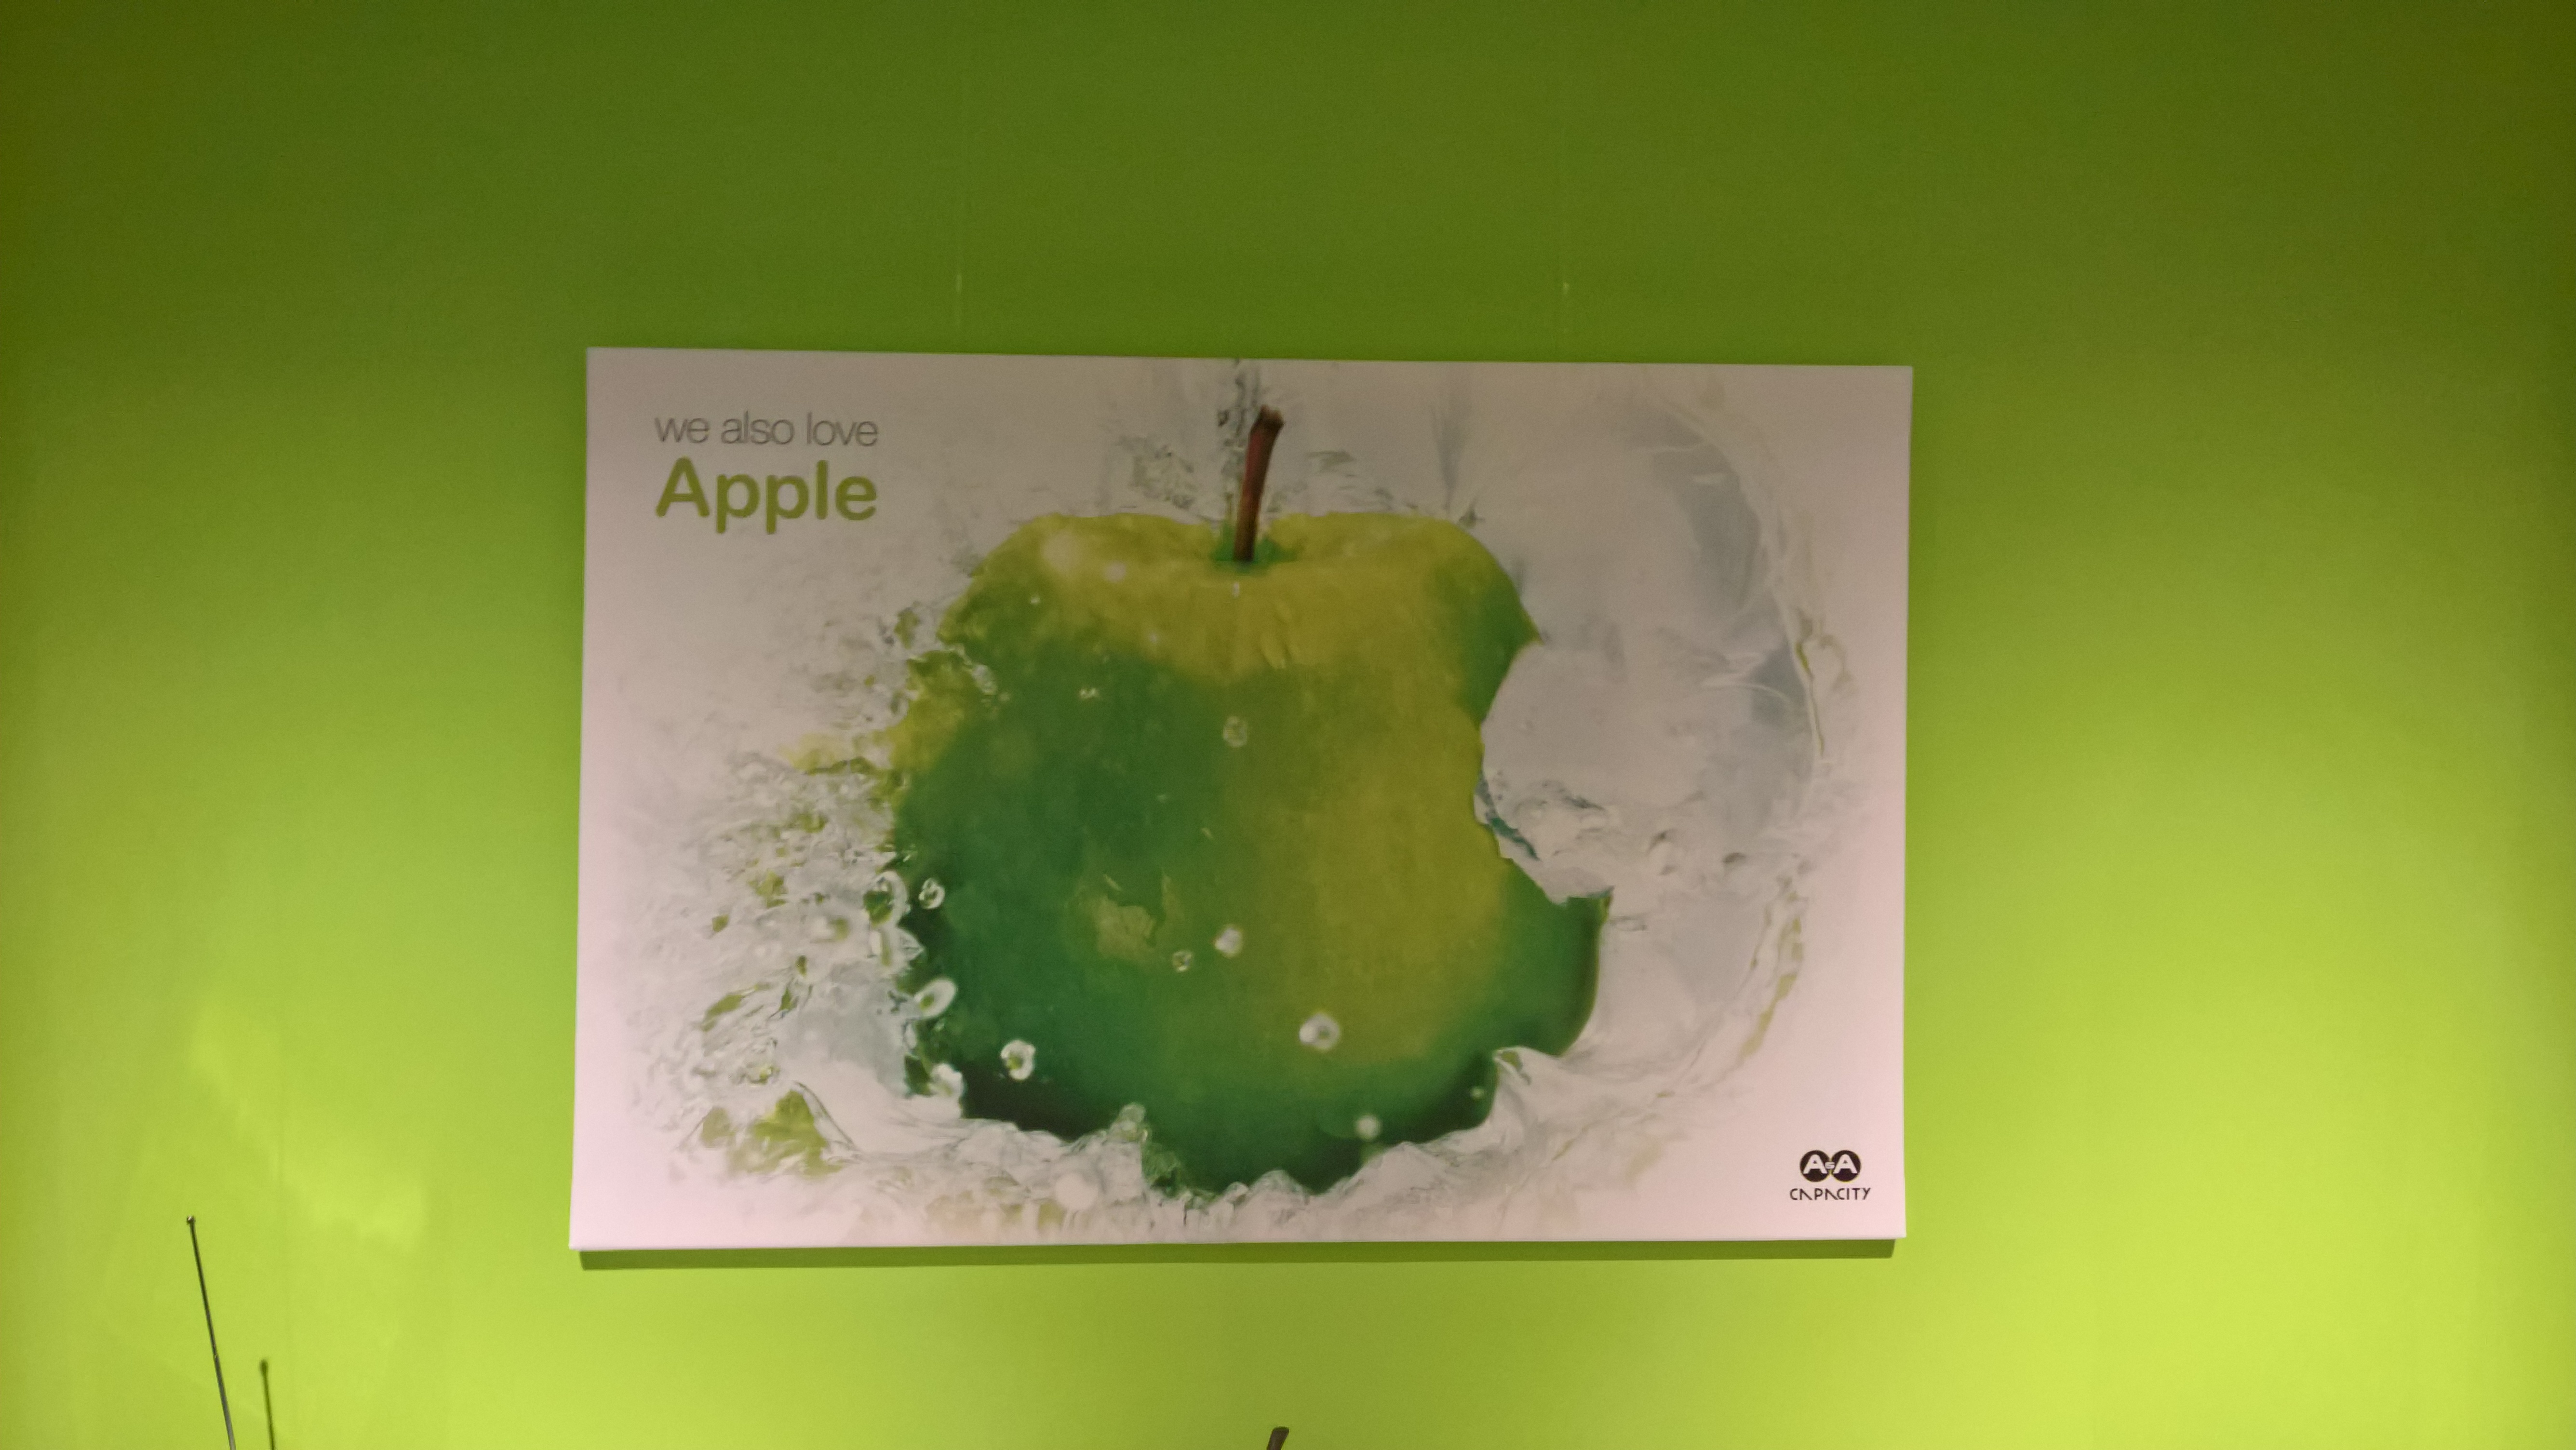 We also like apple